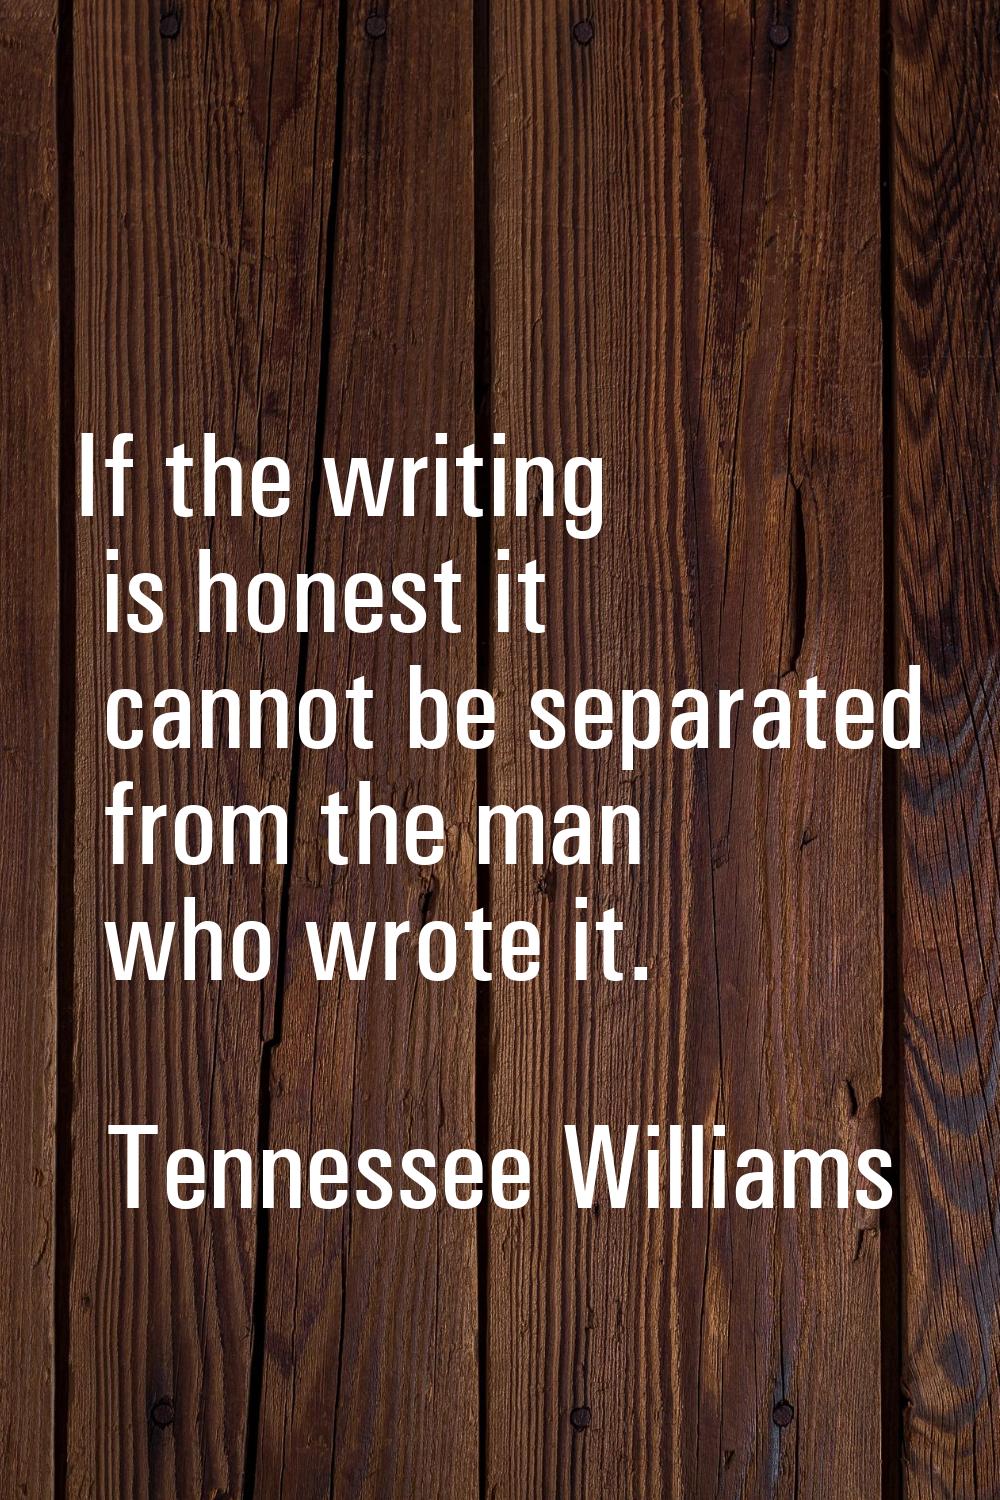 If the writing is honest it cannot be separated from the man who wrote it.